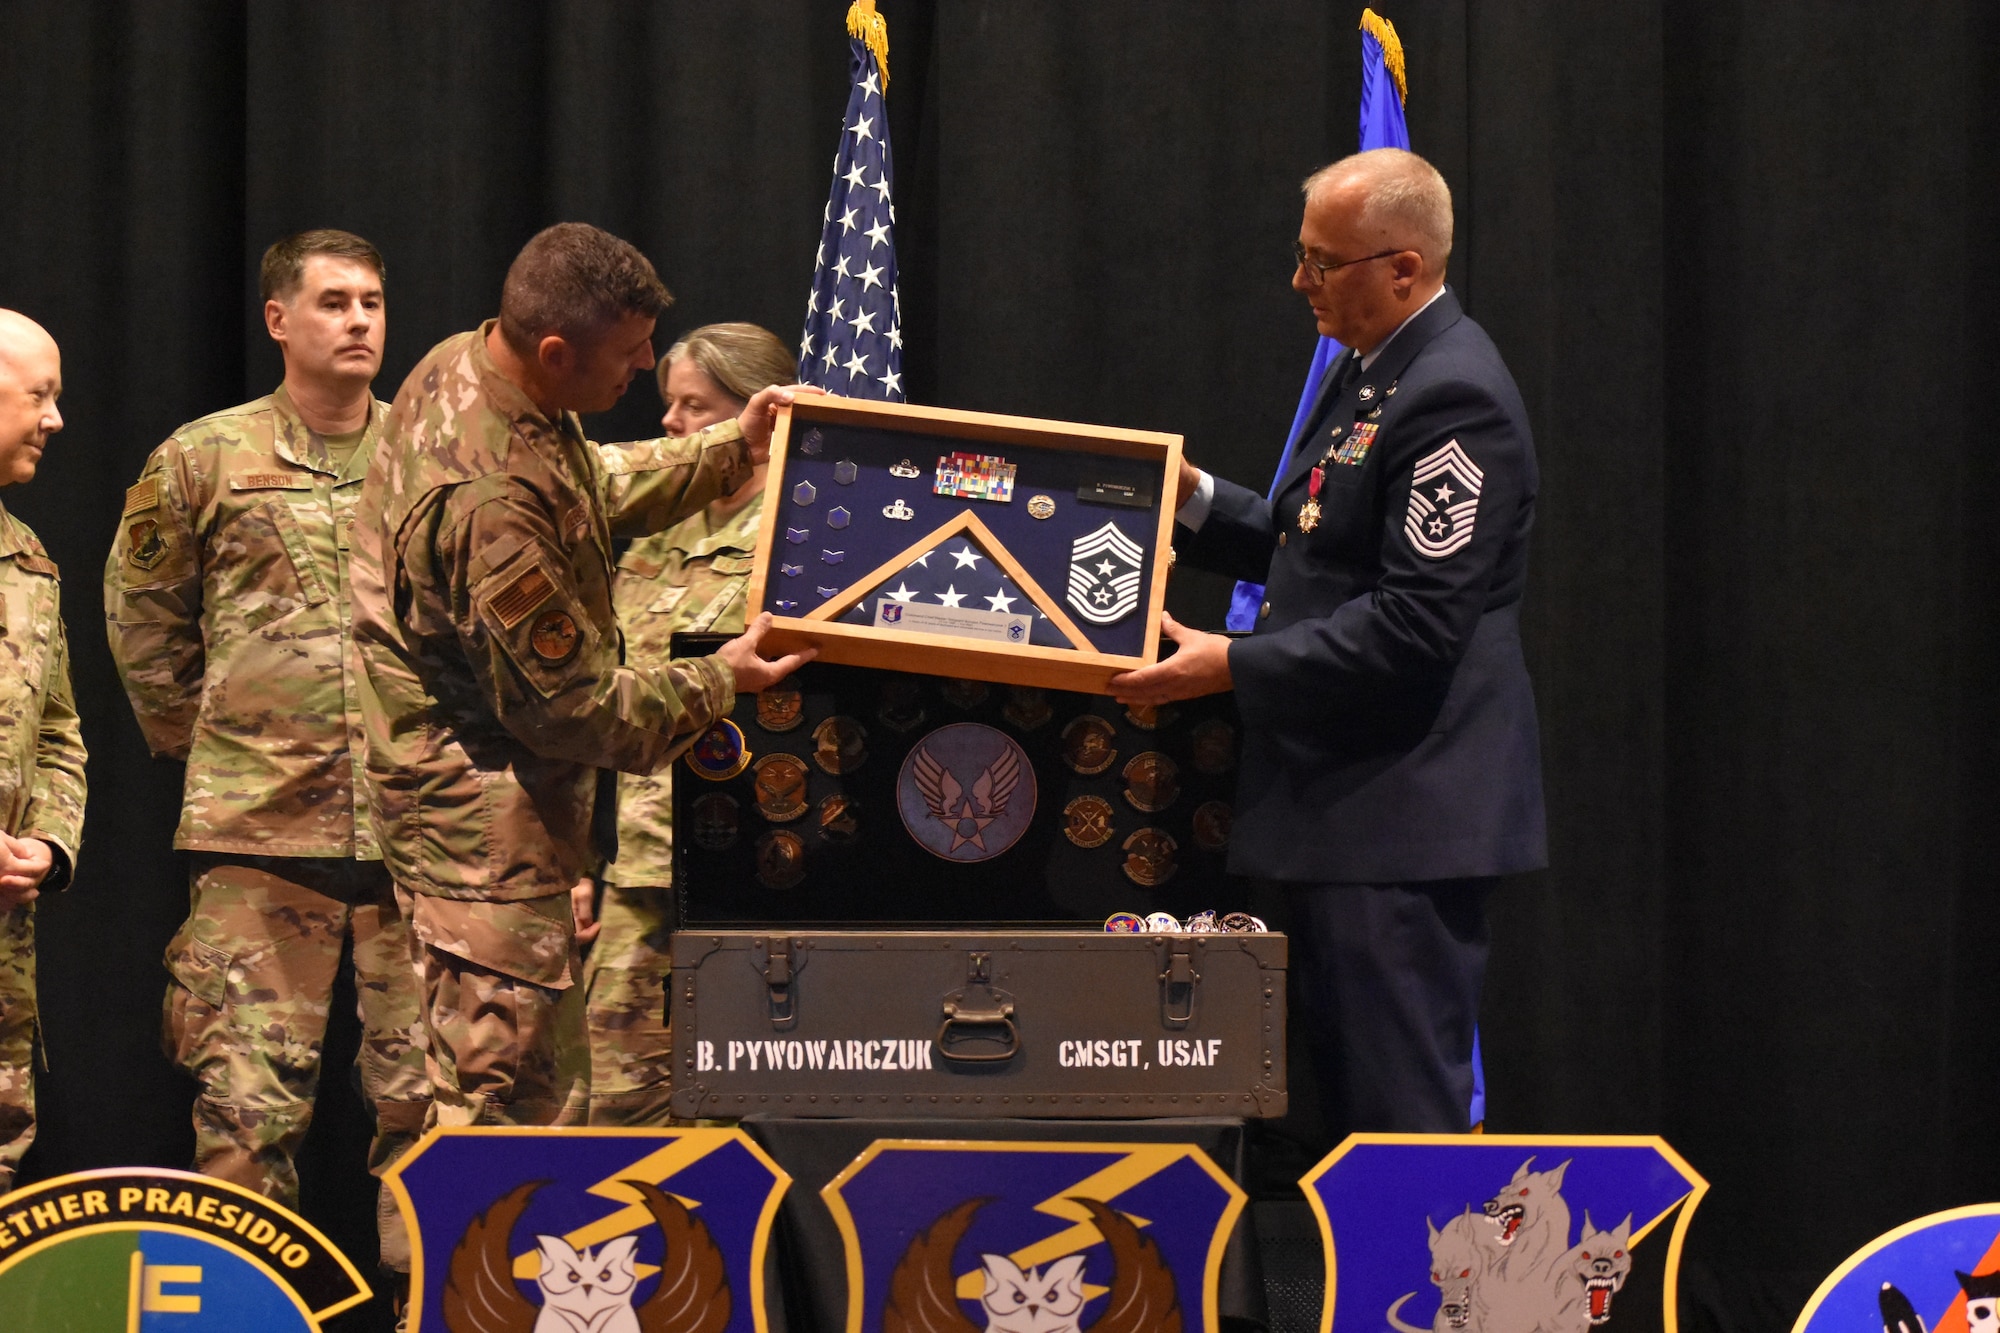 Chief Master Sgt. Bohdan Pywowarczuk II, 655th Intelligence, Surveillance and Reconnaissance Wing (ISRW) Command Chief, right, is presented with a military shadow box and other gifts from members across 655th ISRW units during the chief’s retirement ceremony Sept. 9, 2023, at the National Museum of the U.S. Air Force, Dayton, Ohio.